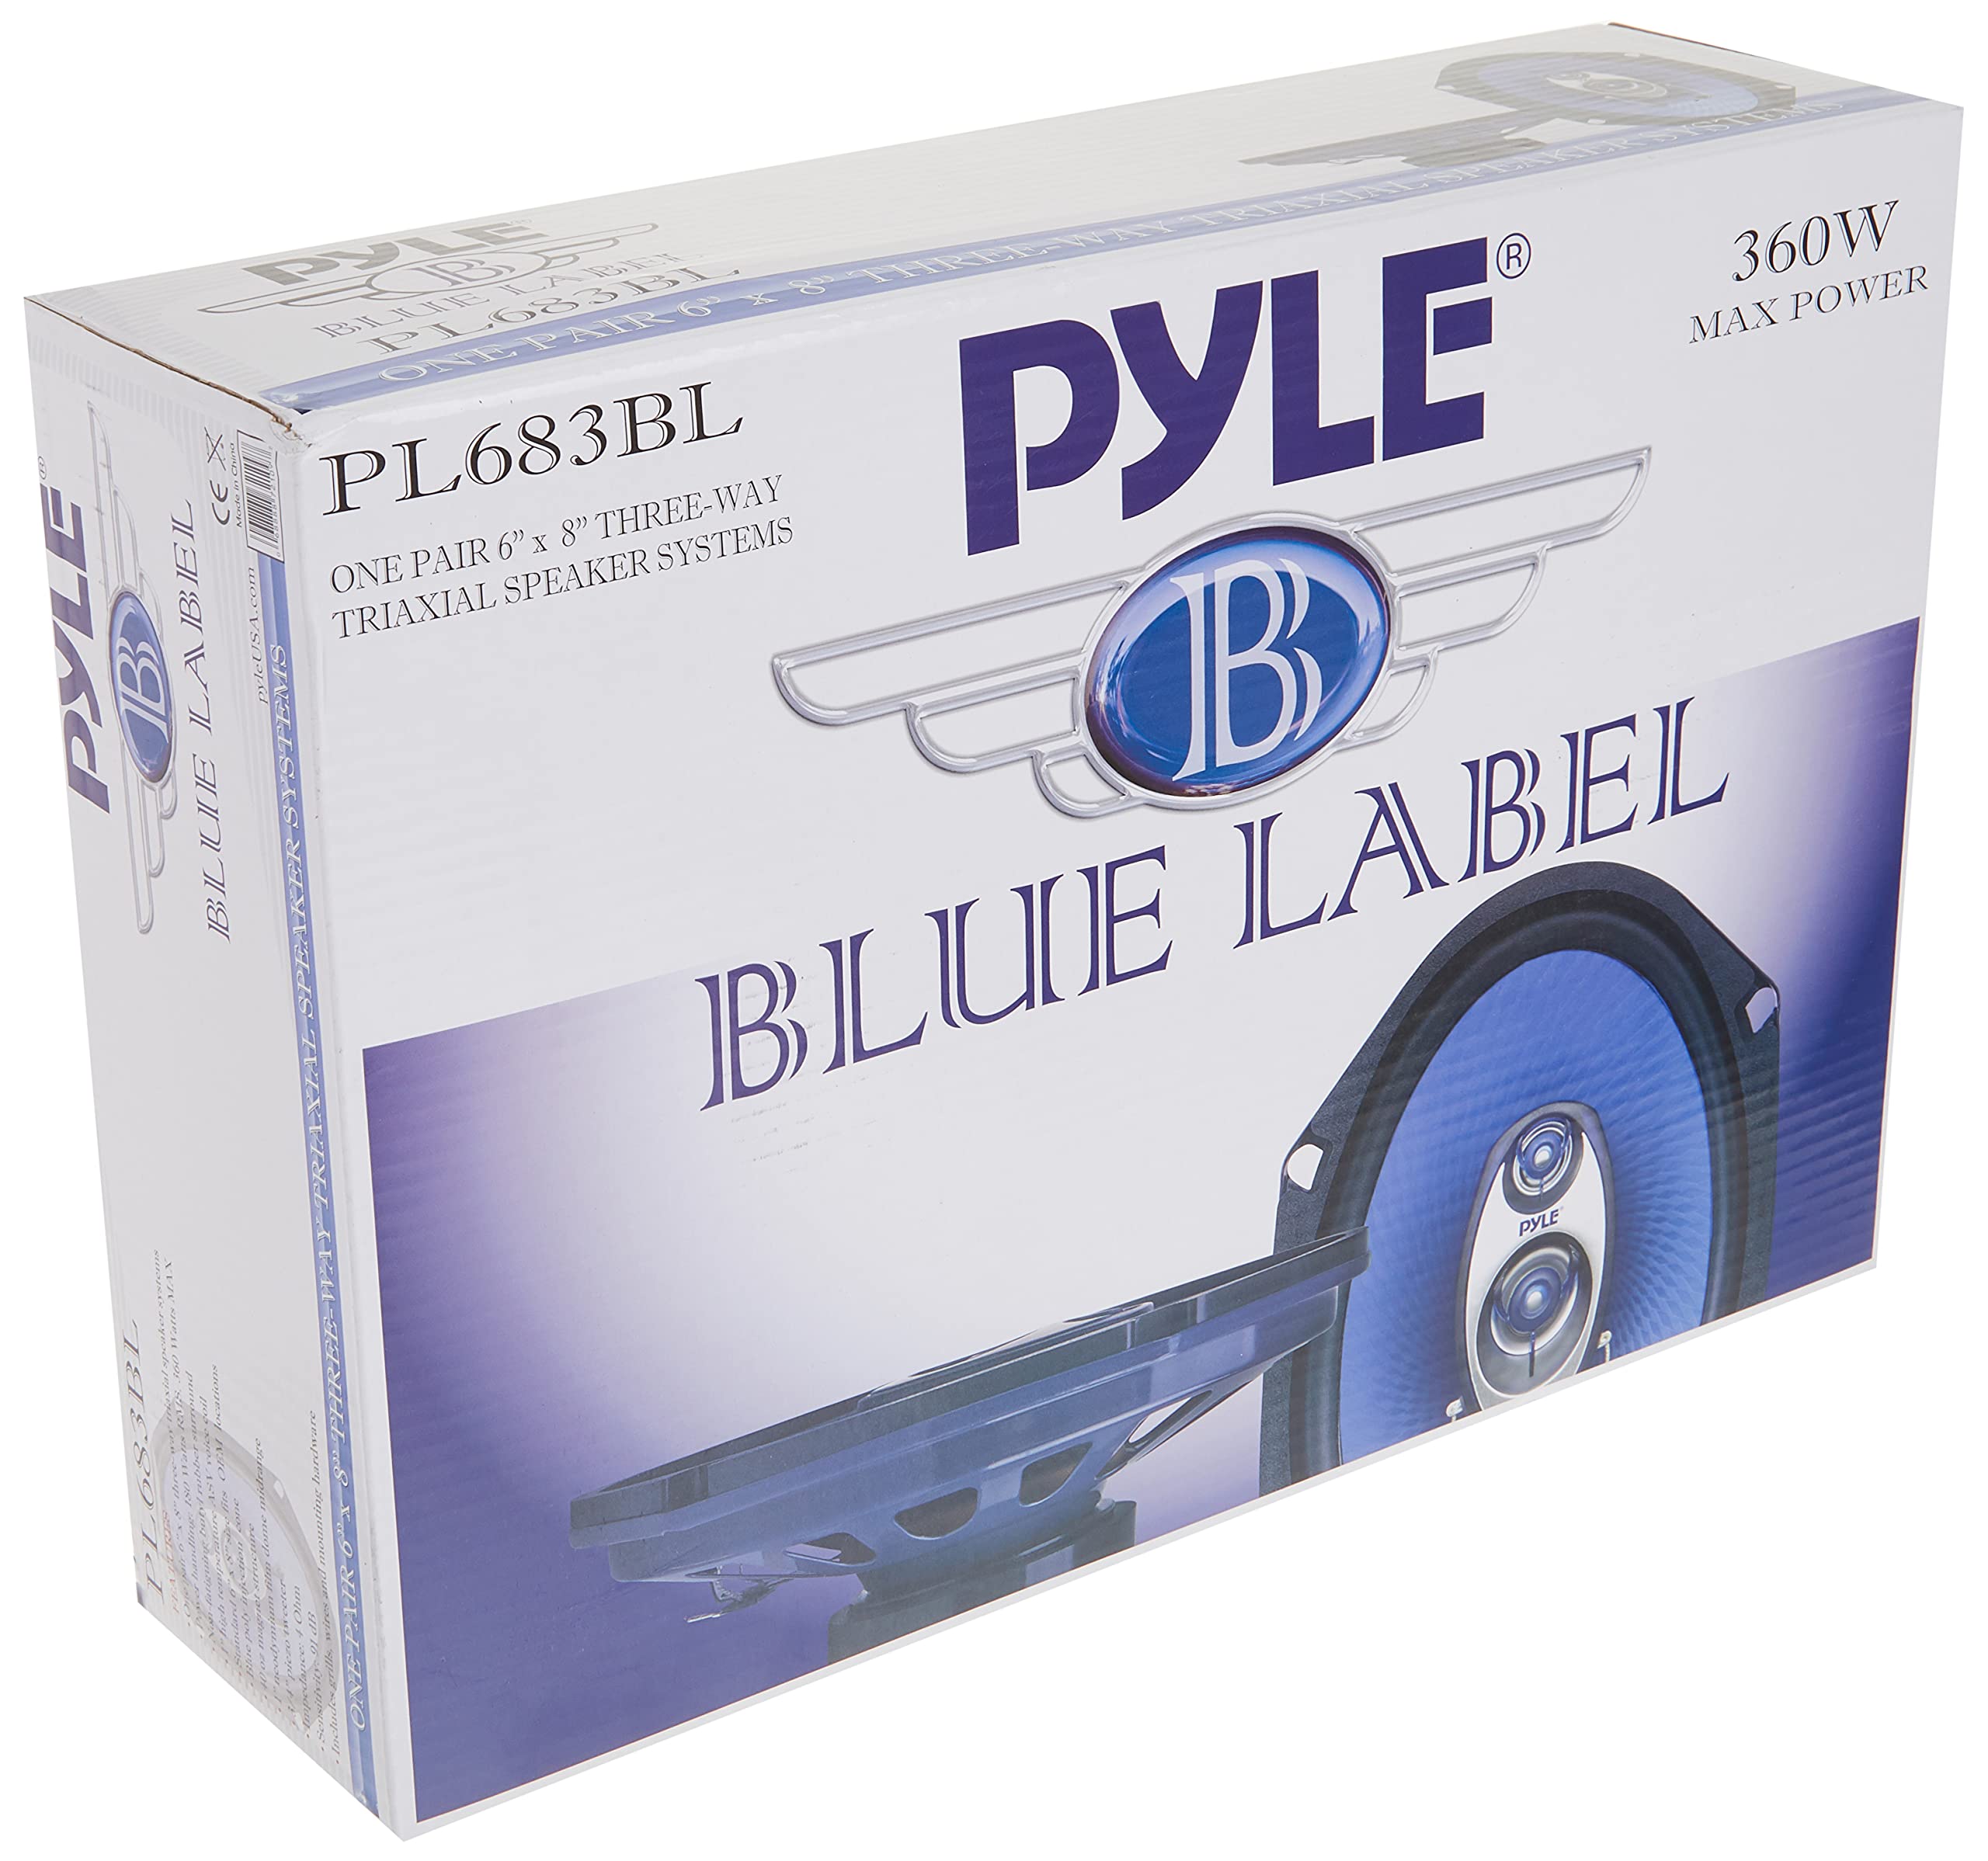 Pyle 6” x 8” Car Sound Speaker (Pair) - Upgraded Blue Poly Injection Cone 3-Way 360 Watts w/ Non-fatiguing Butyl Rubber Surround 70 - 20Khz Frequency Response 4 Ohm & 1